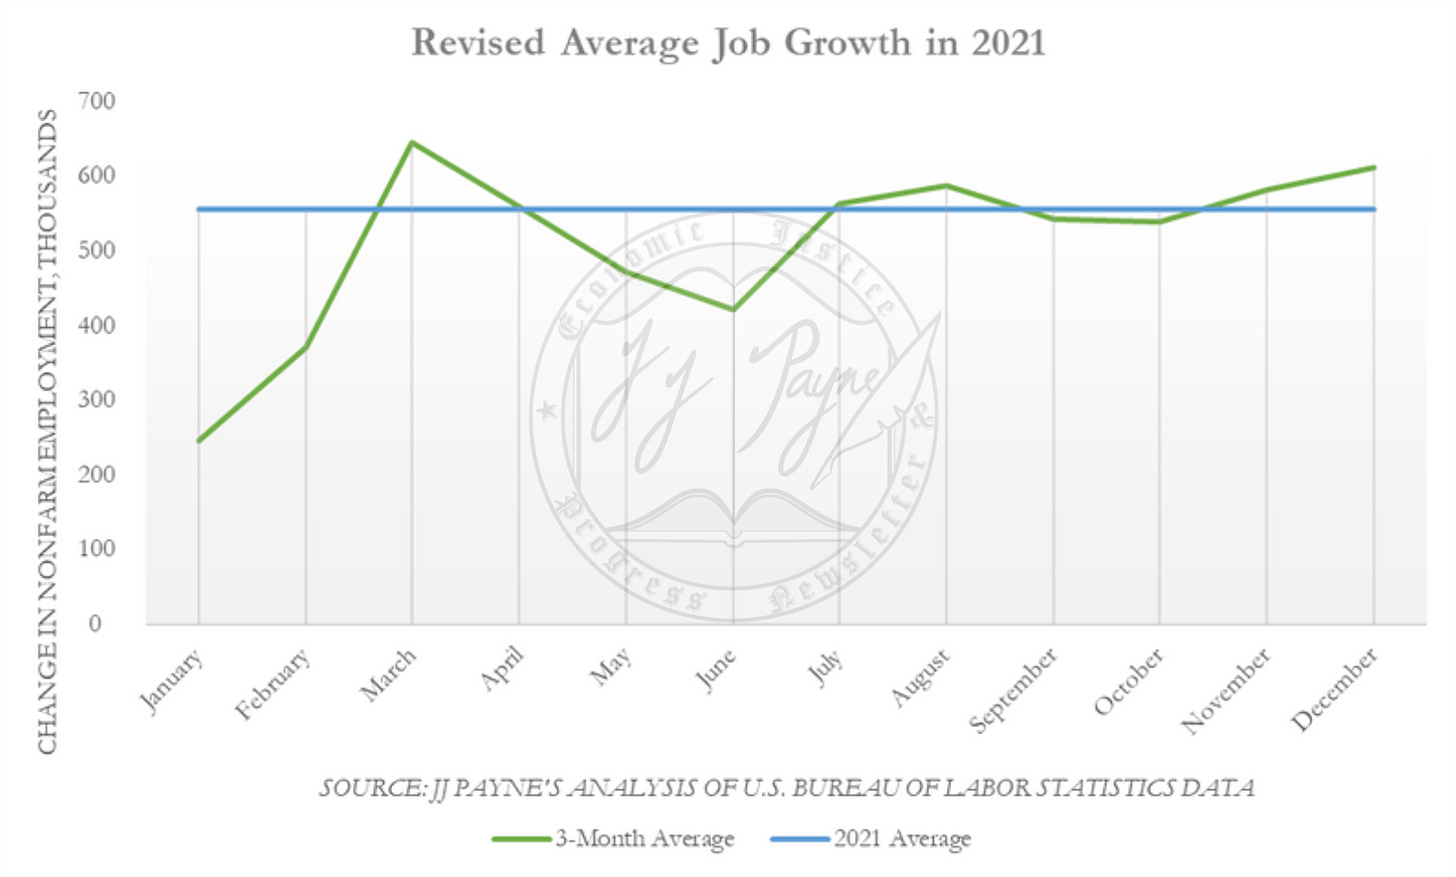 Revised average job growth in 2021